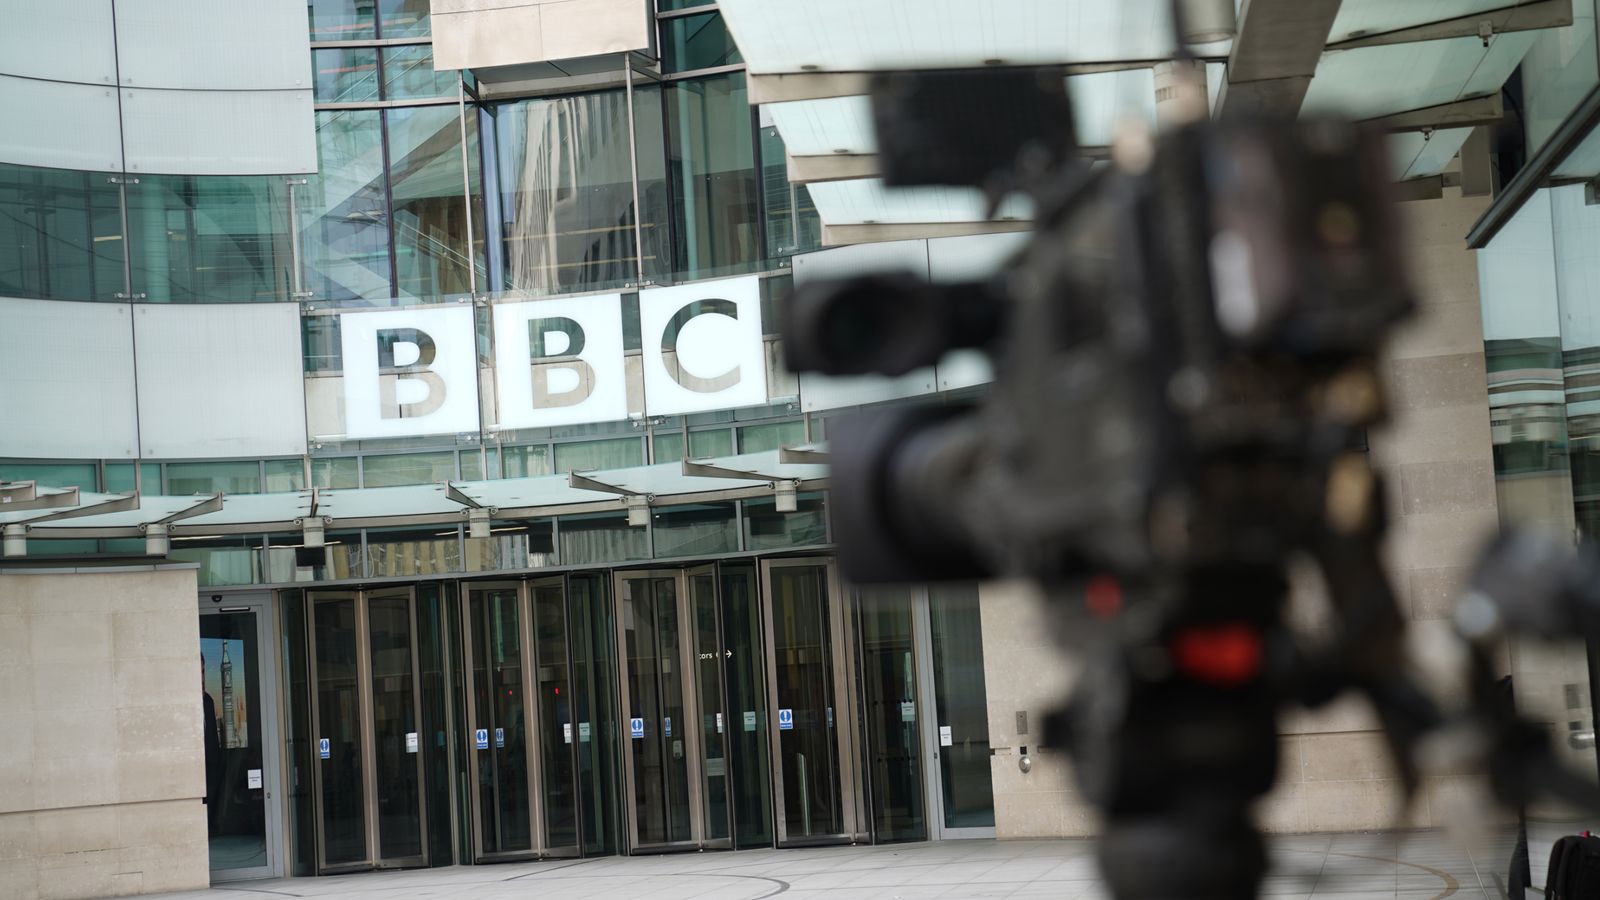 BBC presenter scandal: Culture secretary to hold talks with corporation over explicit photo claims